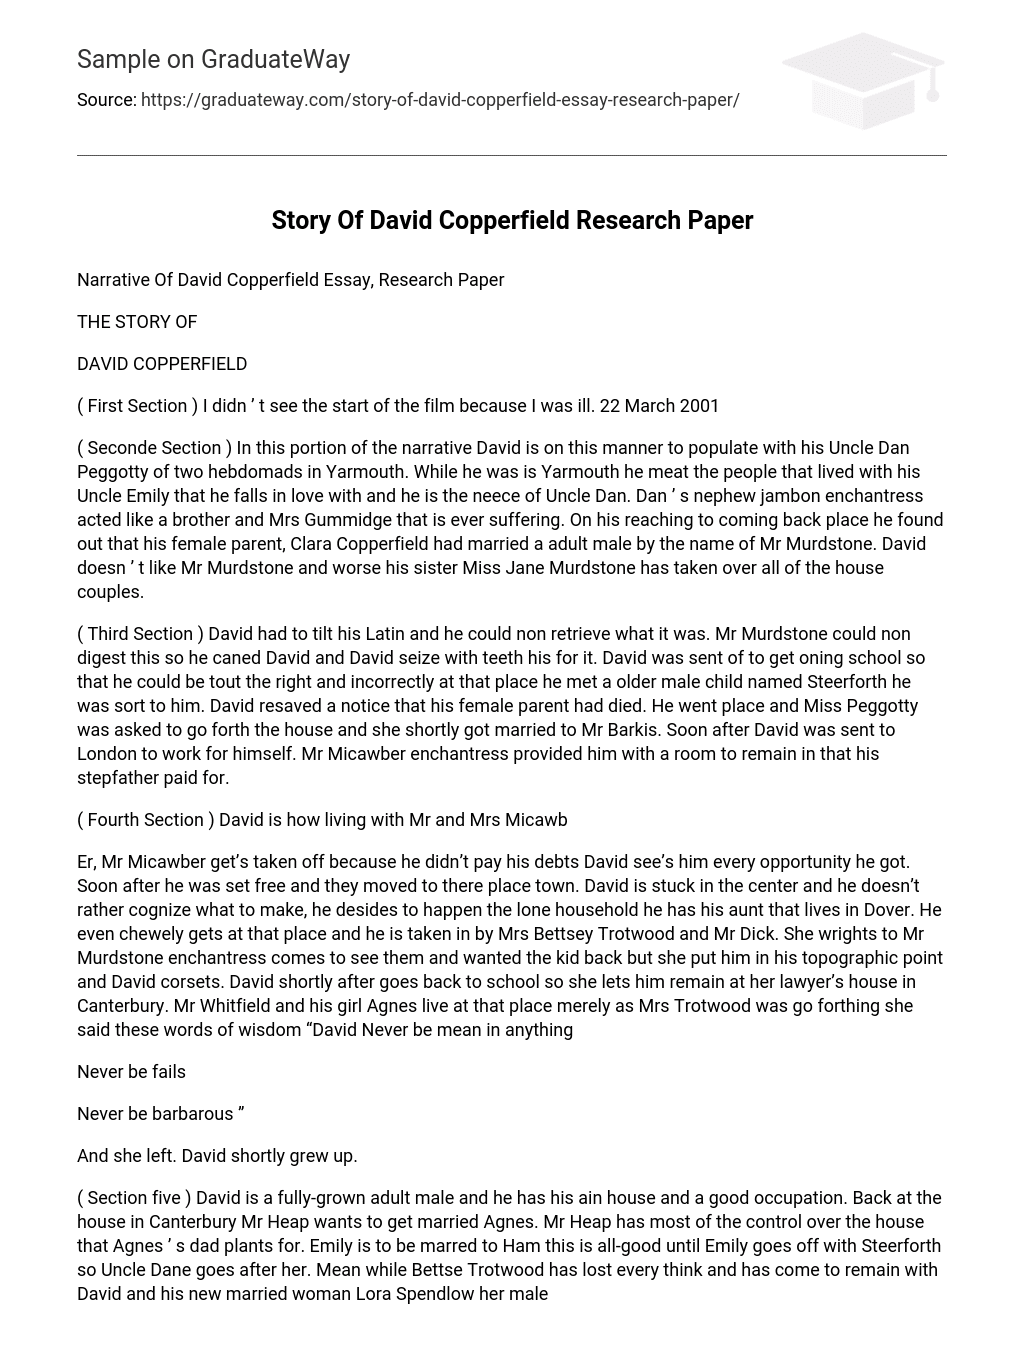 Story Of David Copperfield Research Paper